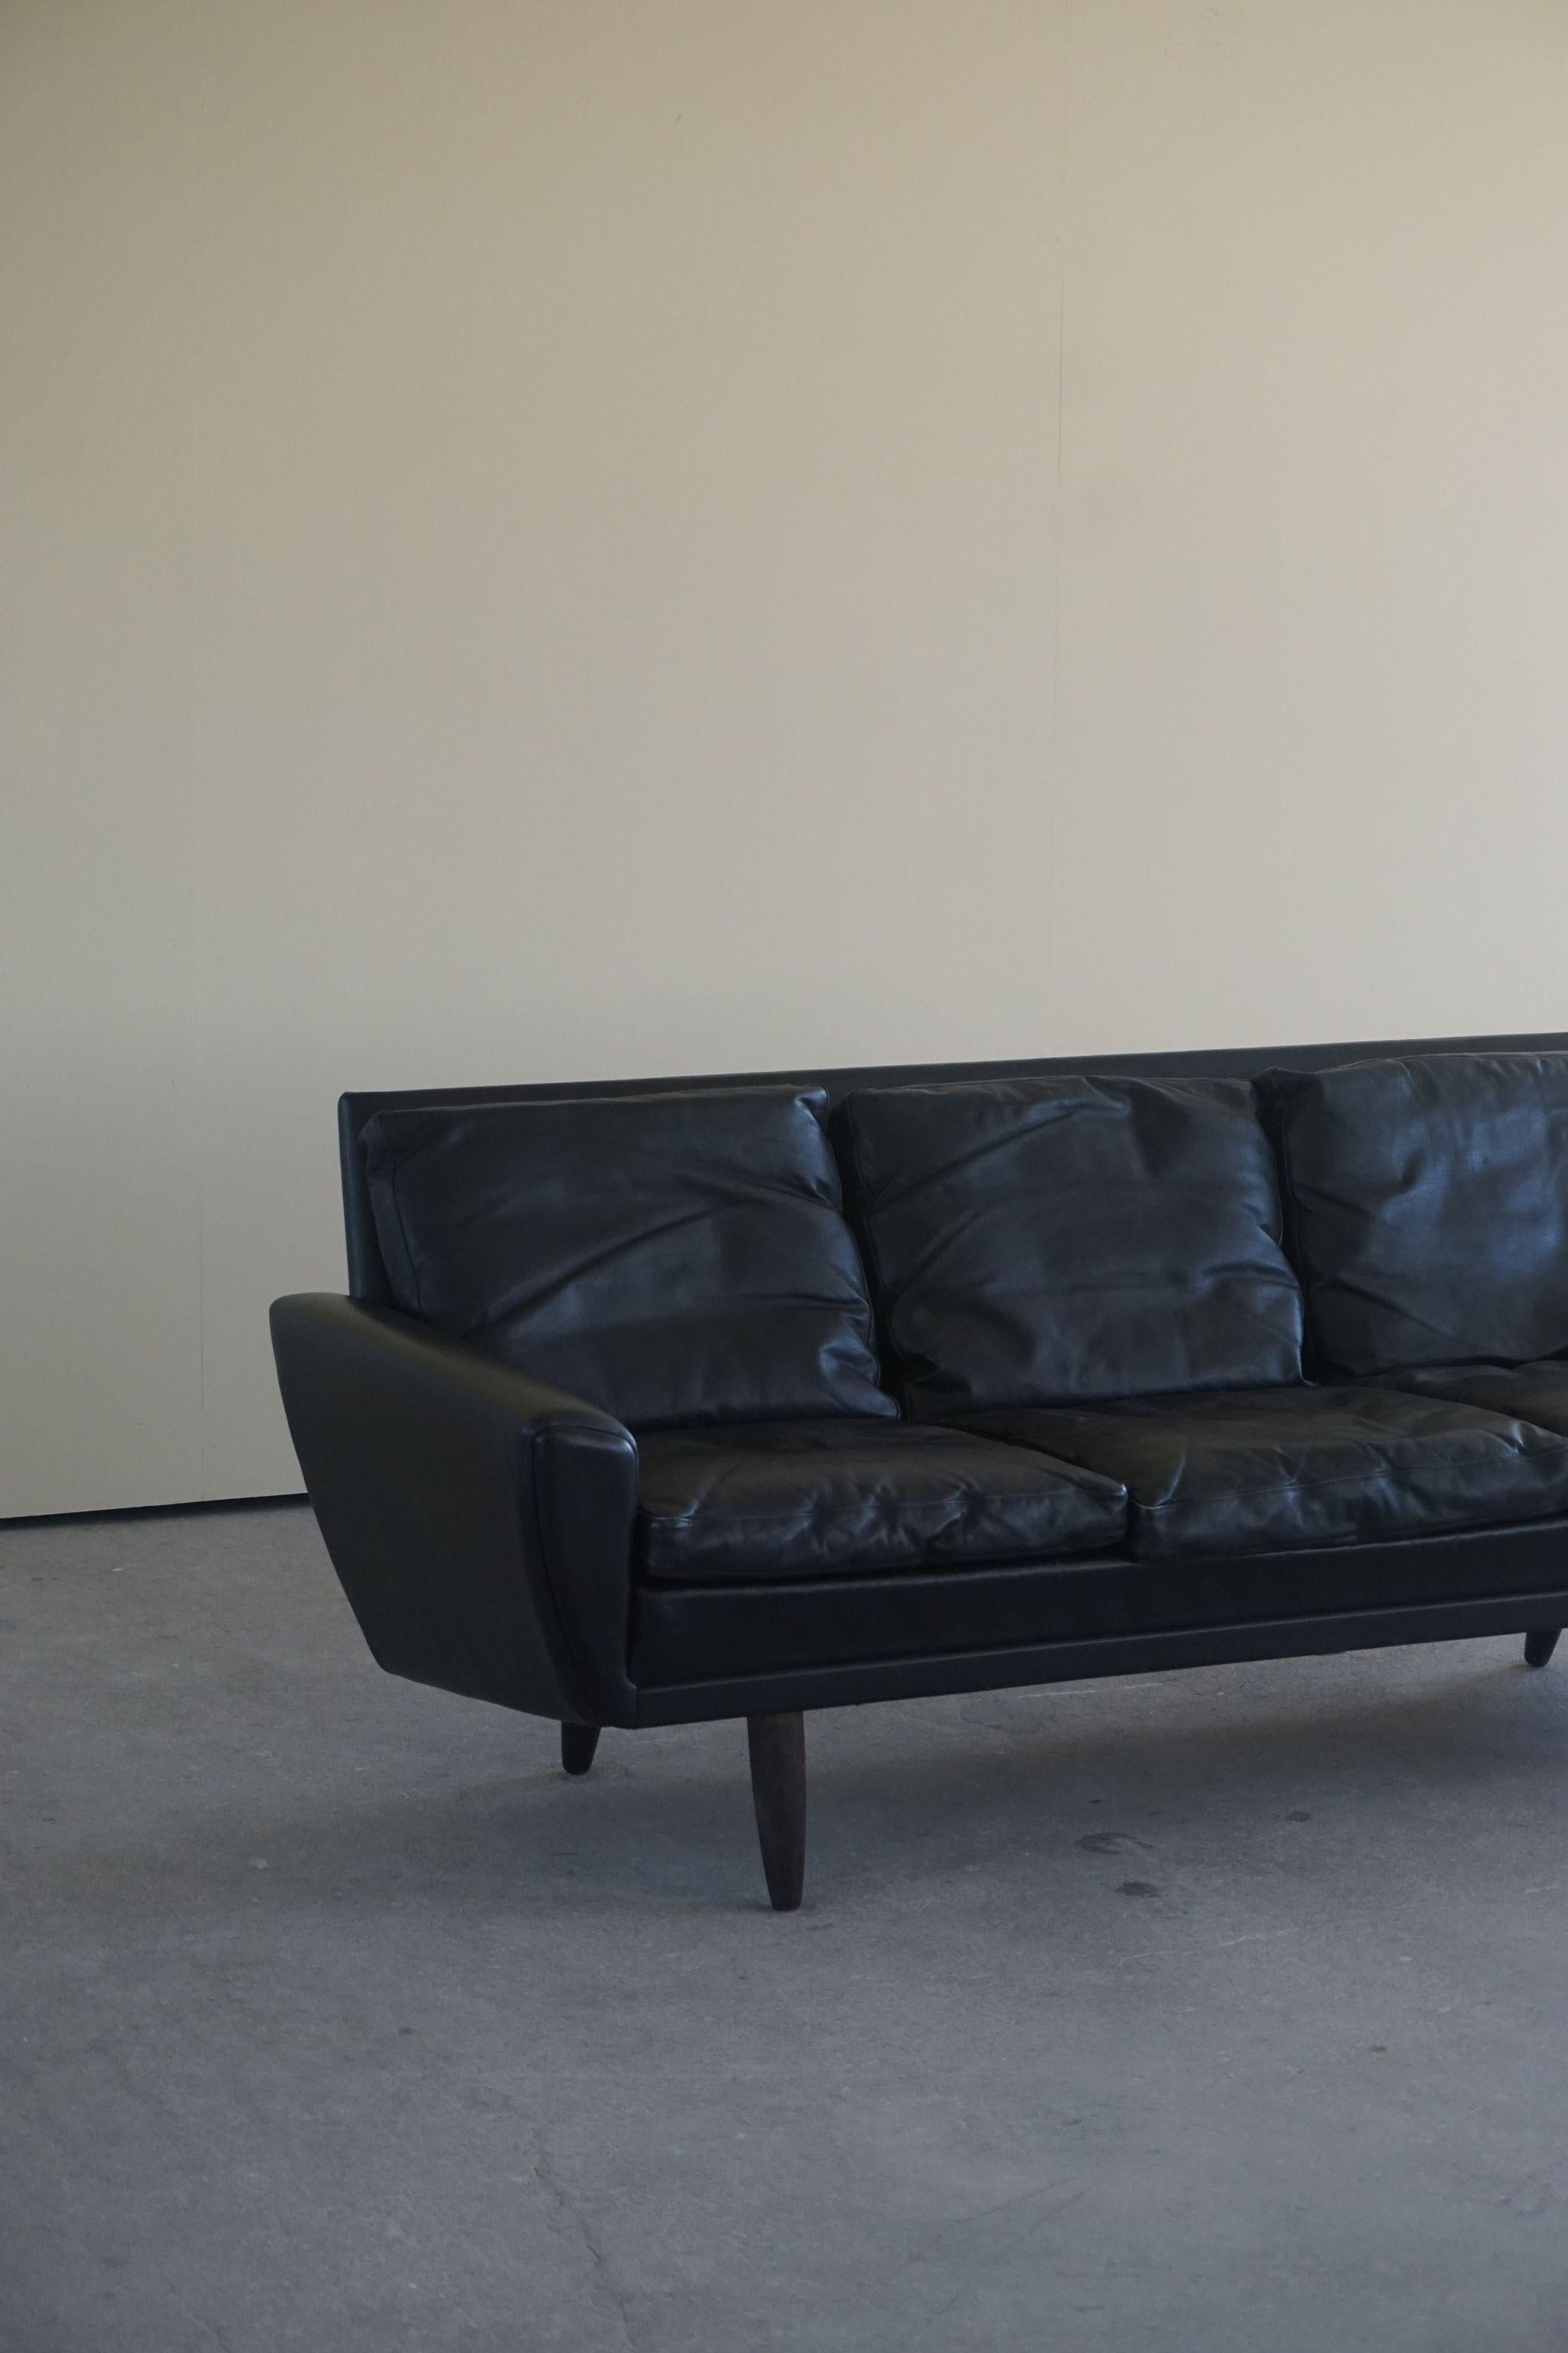 Mid-Century Modern Danish Modern Sofa by Georg Thams in Black Leather and Rosewood Legs, 1964